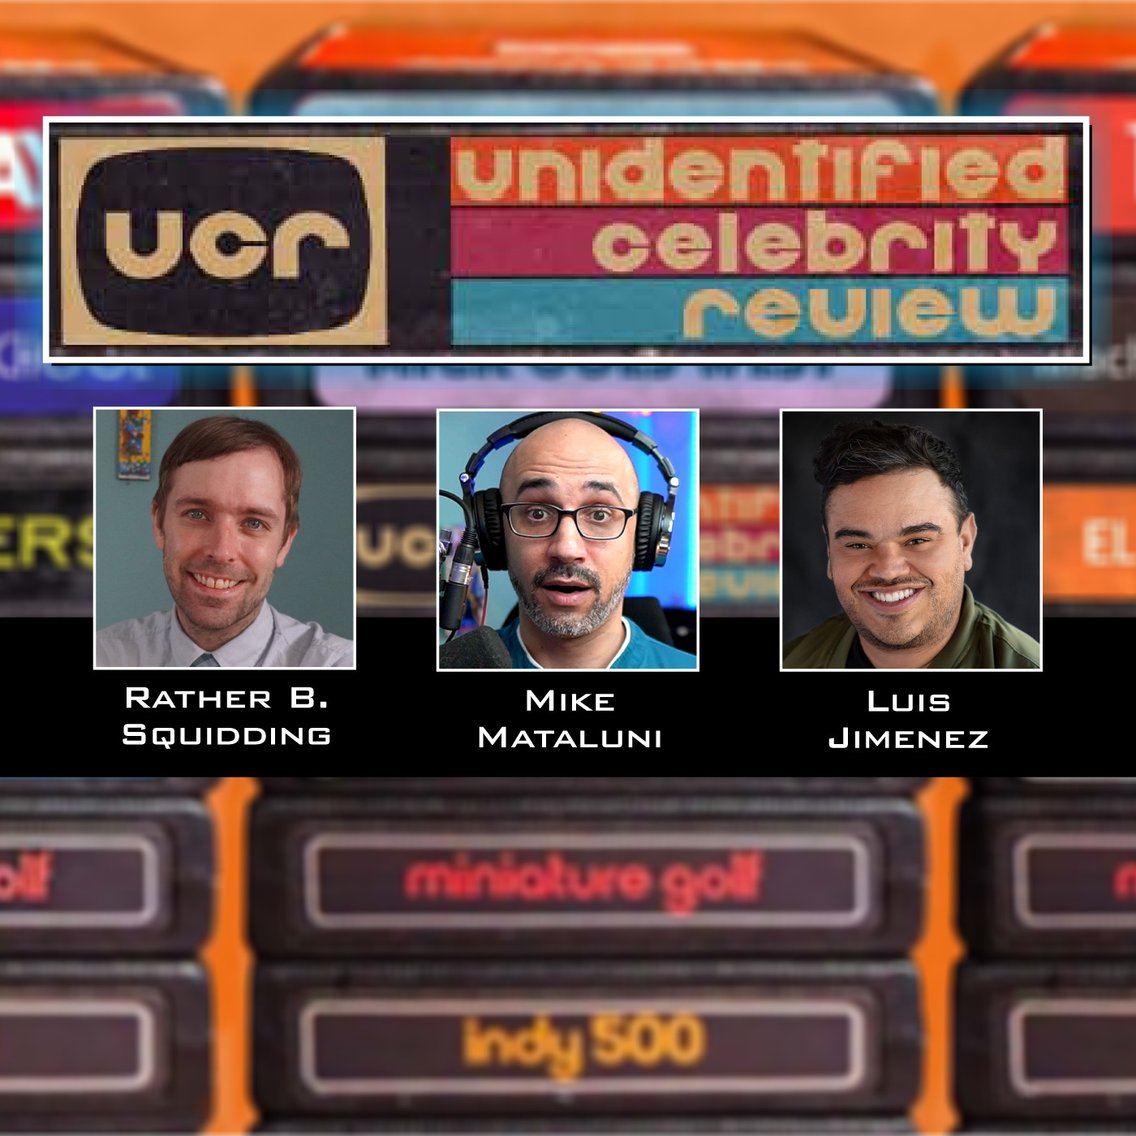 The Unidentified Celebrity Review - Cover Image